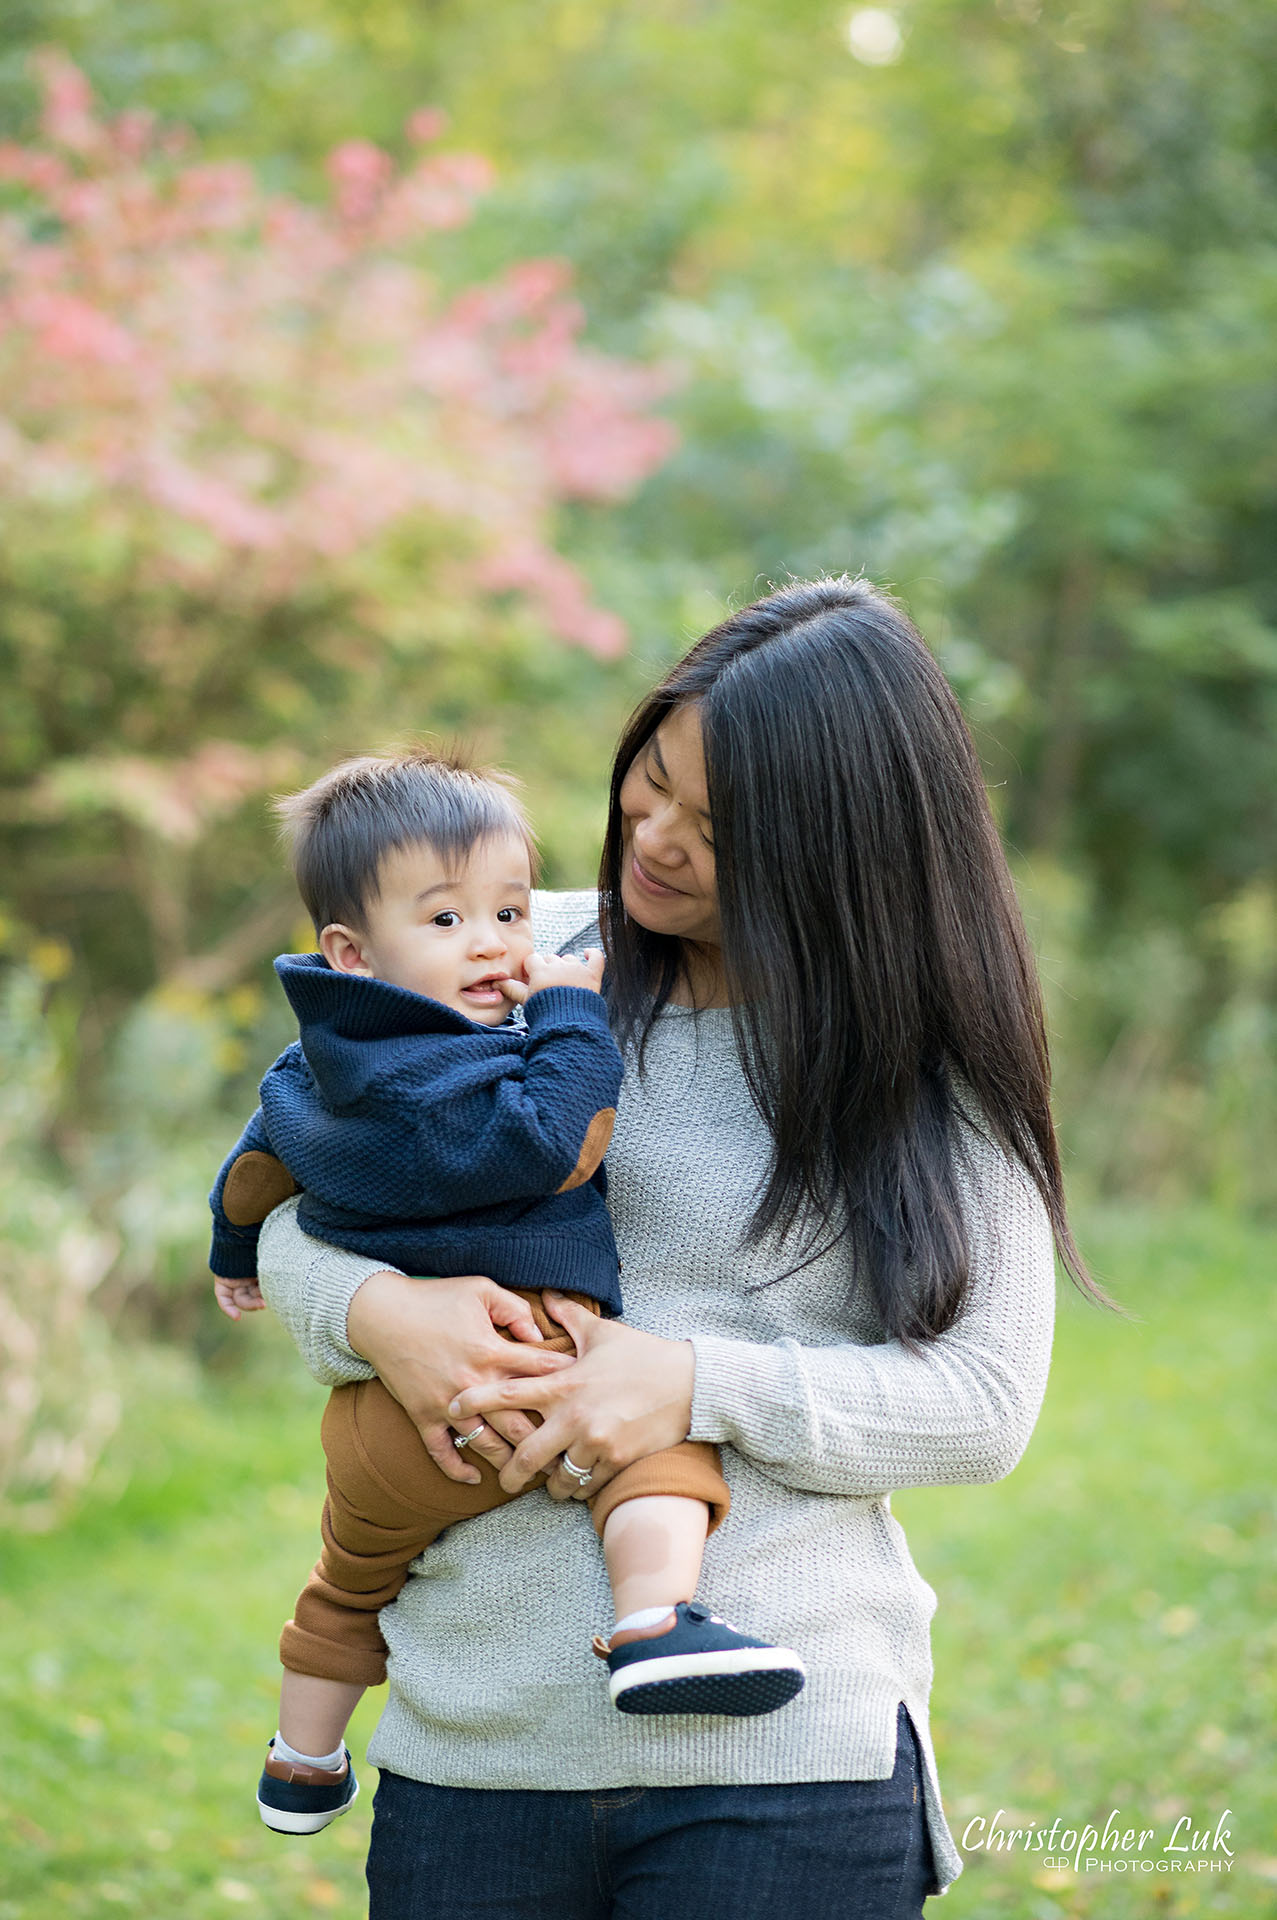 Christopher Luk Family Photographer Toronto Markham Unionville Autumn Fall Leaves Natural Candid Photojournalistic Mother Motherhood Son Brother Baby Boy Smile